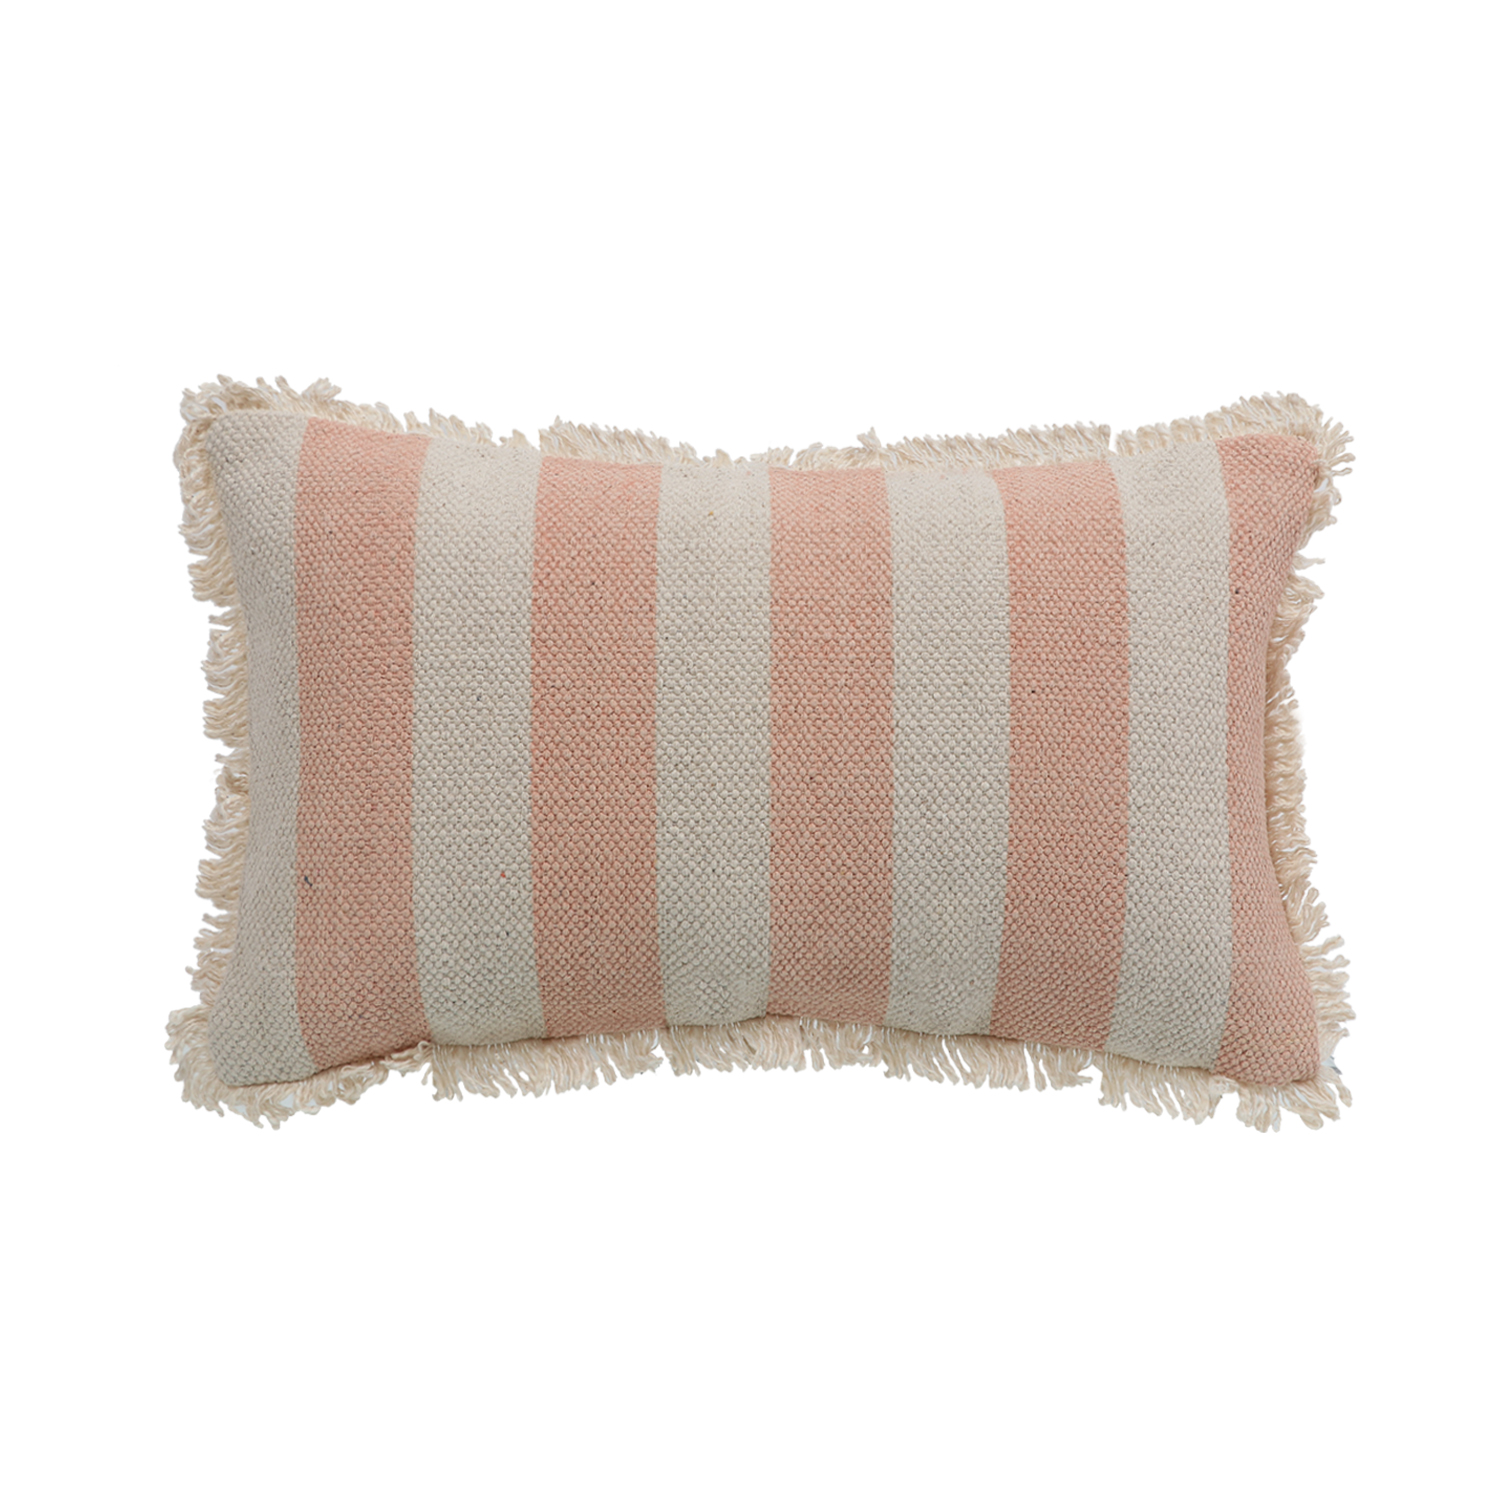 Printed Stripe Pink Cushions Covers with fringes 12X20 Inch